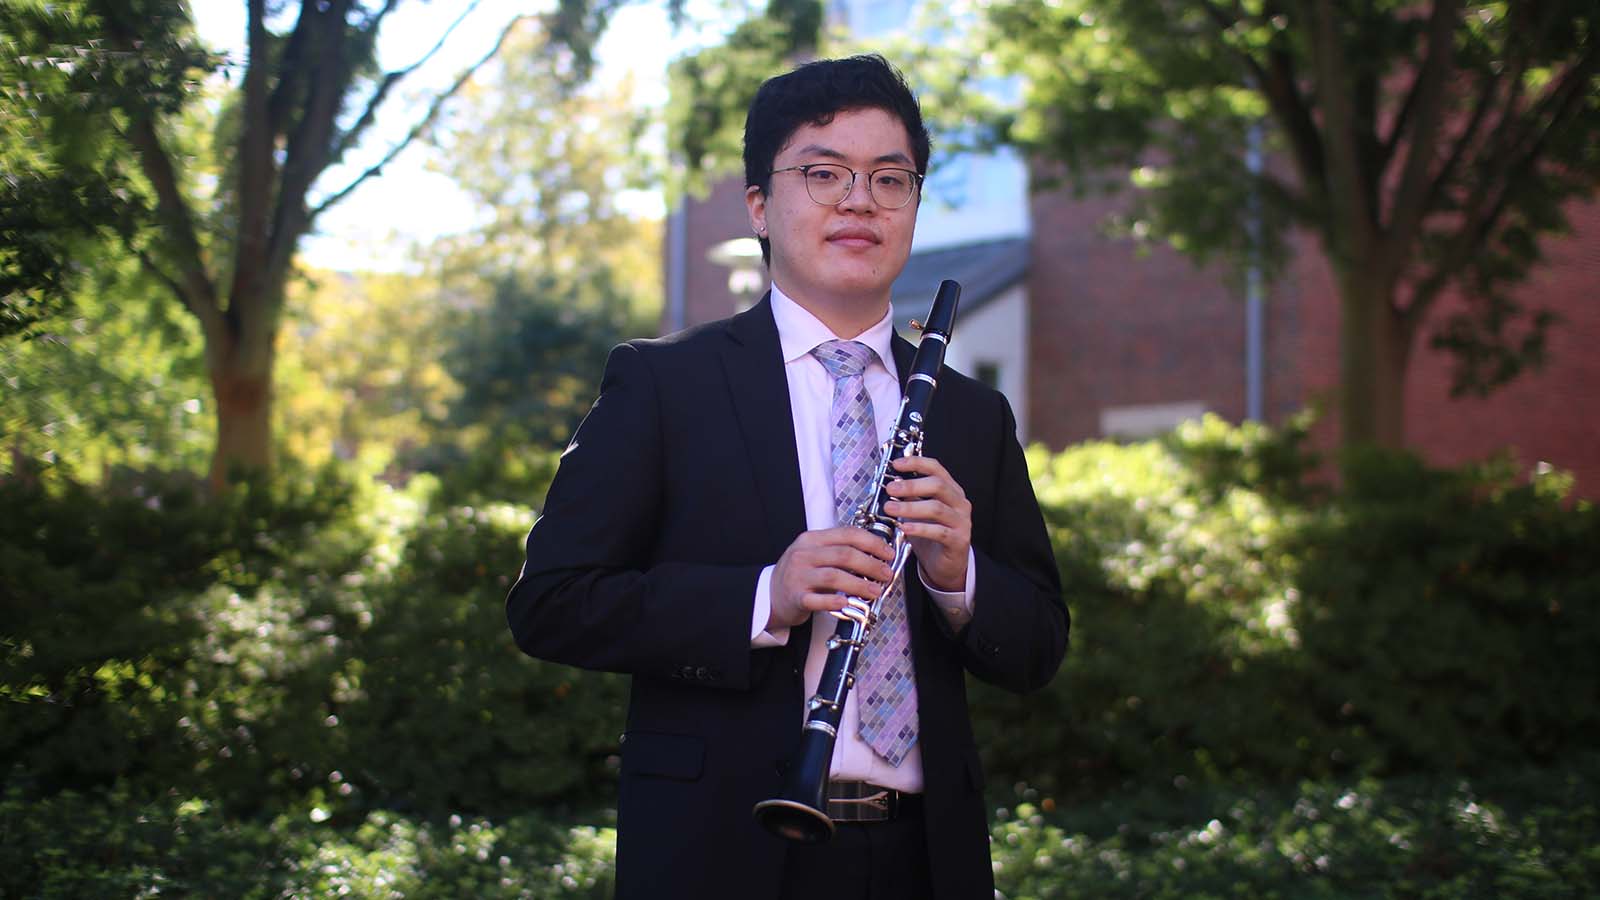 Andrew Zhang with his clarinet.